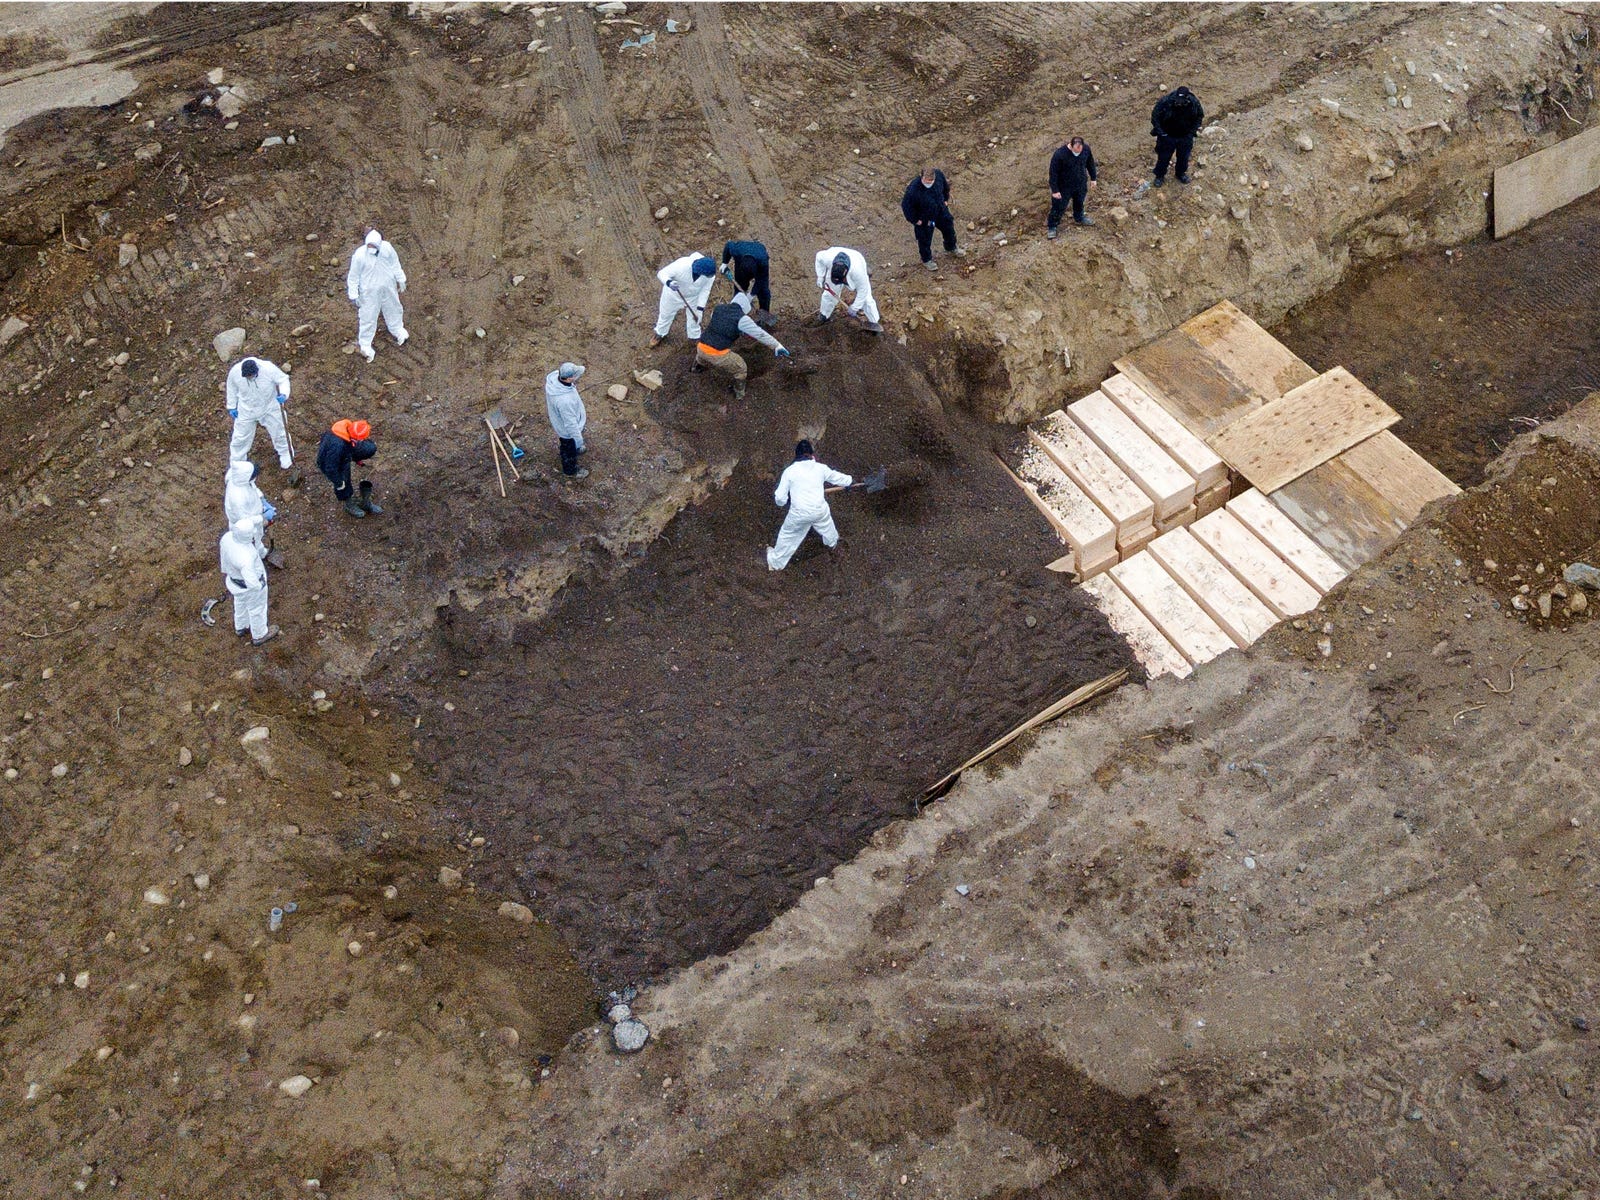 Workers employed by New York State bury the bodies of COVID-19 victims in a mass grave on Hart Island, off the coast of New York City.